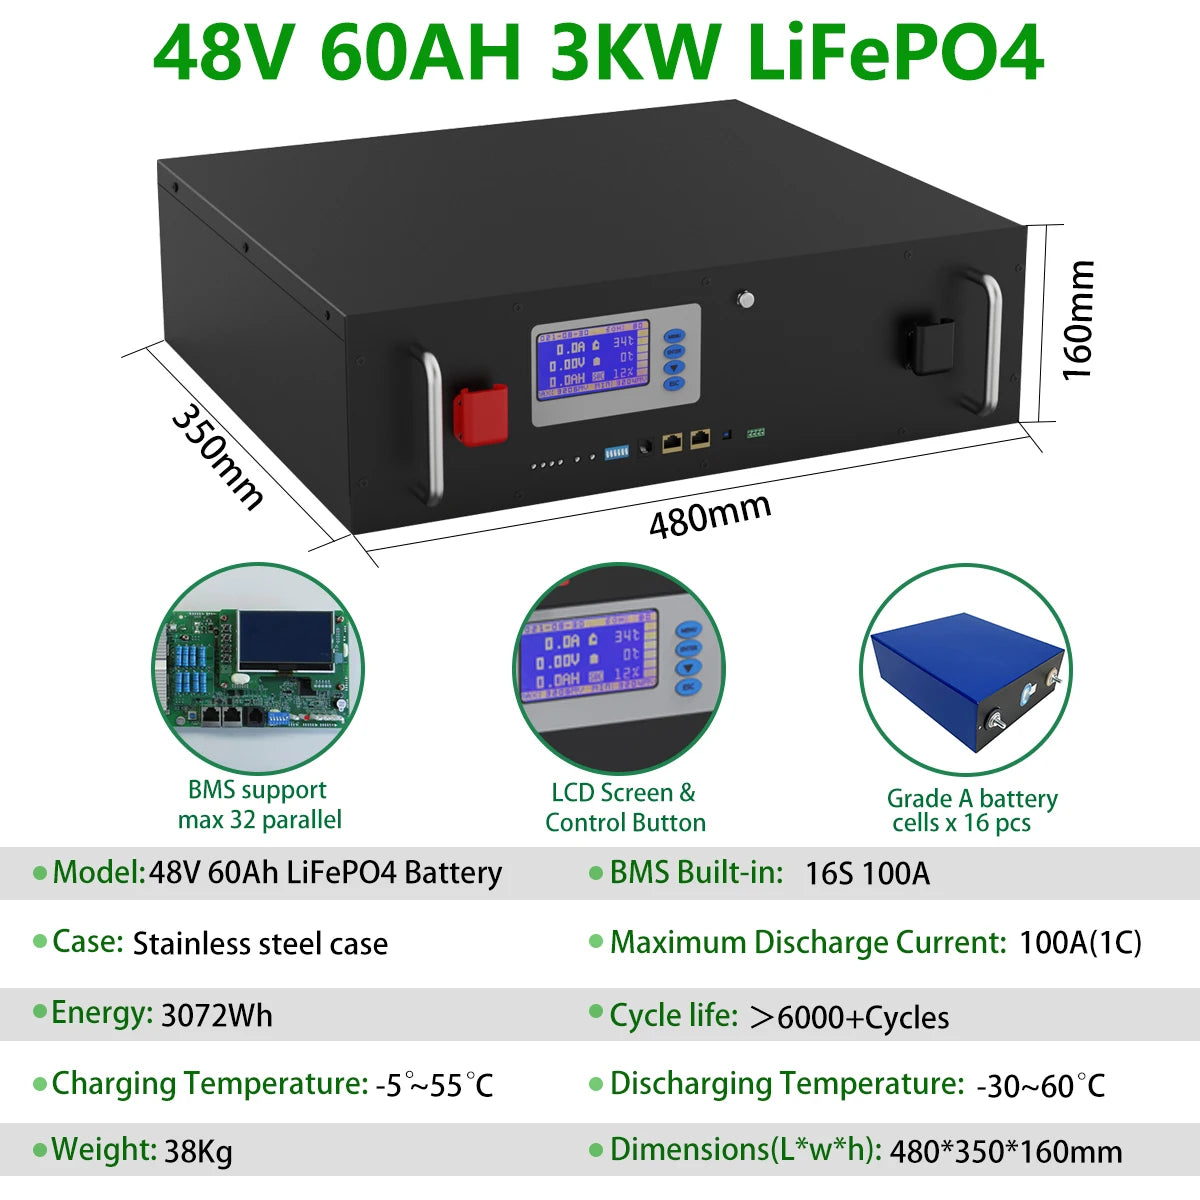 LiFePO4 48V 3KW Battery, High-quality LiFePO4 battery pack with built-in BMS, LCD screen, and stainless steel case.